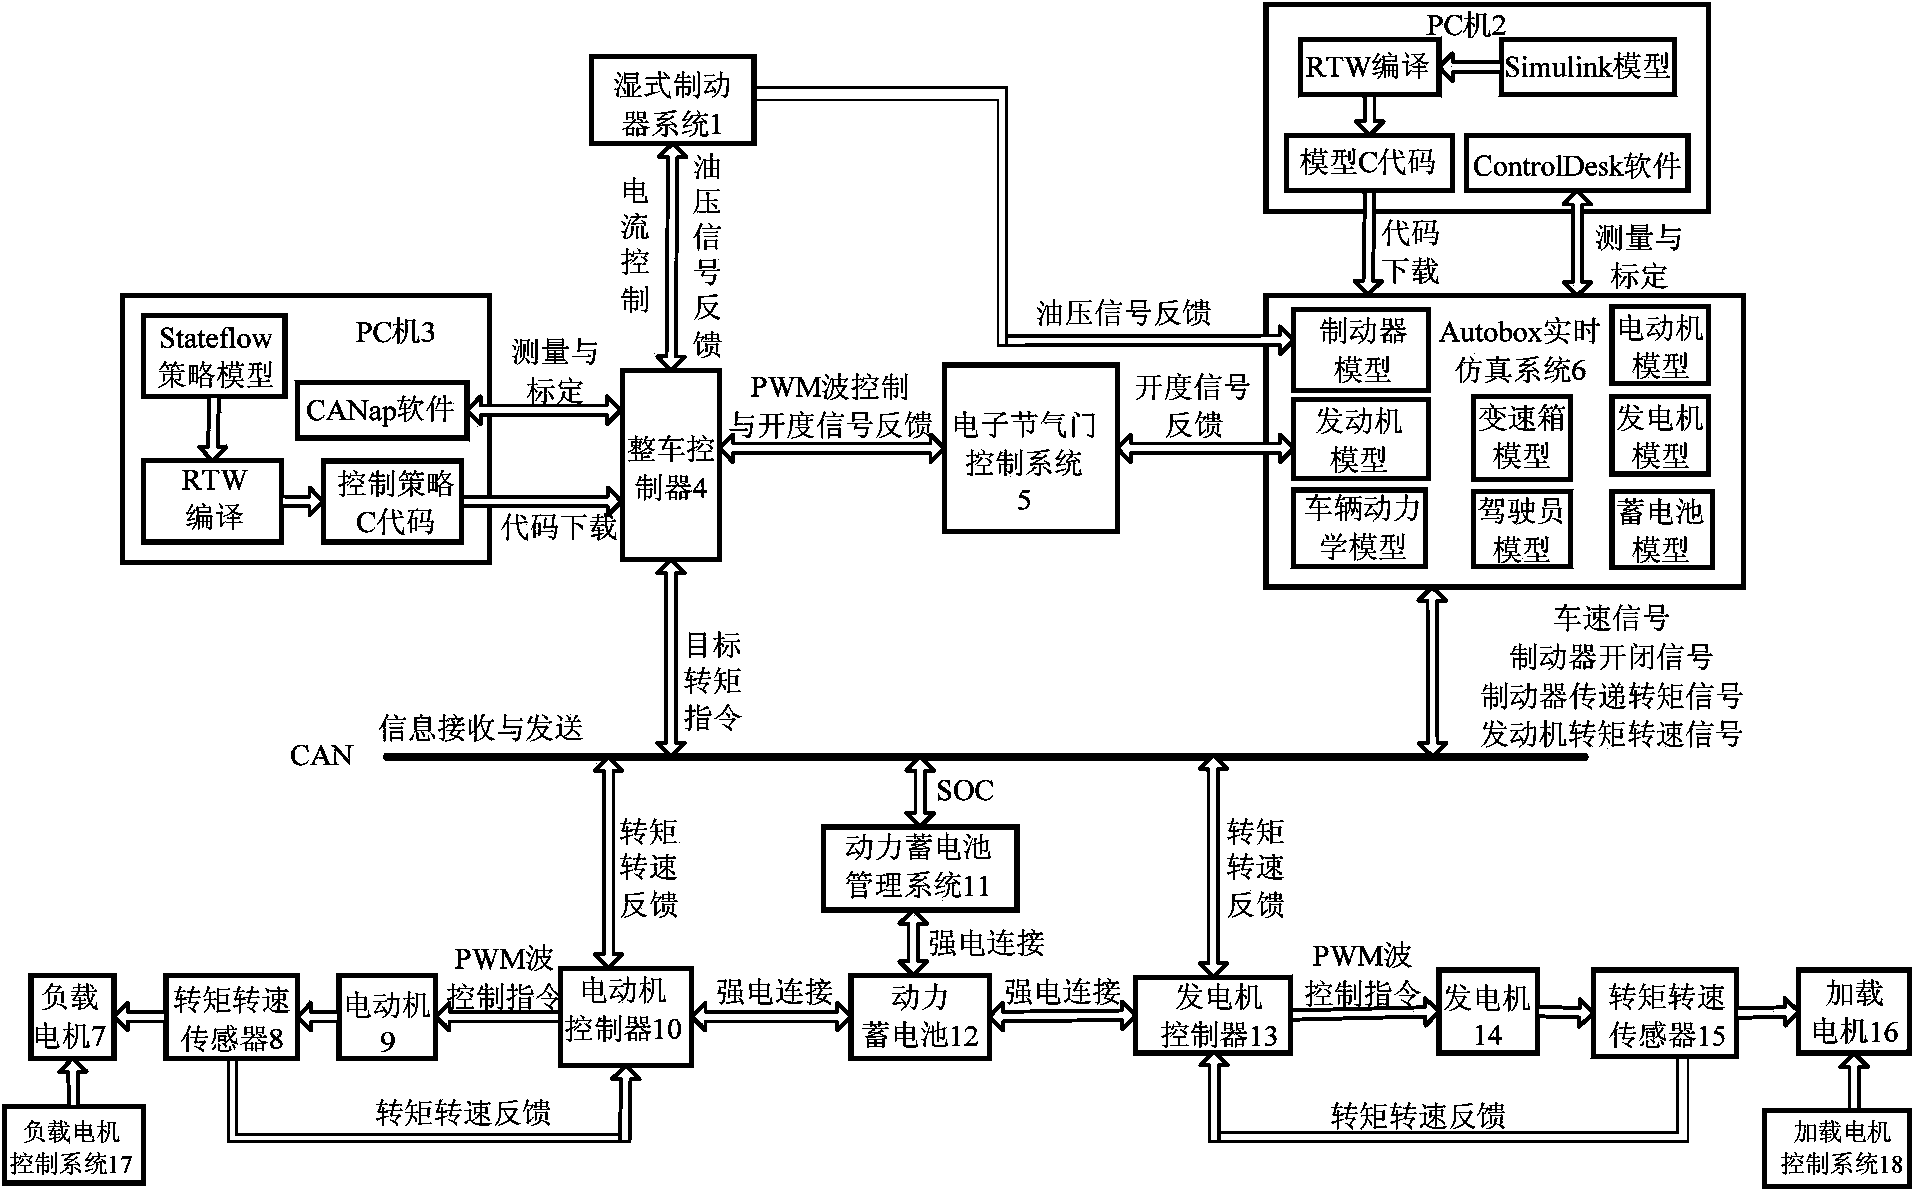 Power split hybrid system mode switching hardware-in-the-loop simulation test bench